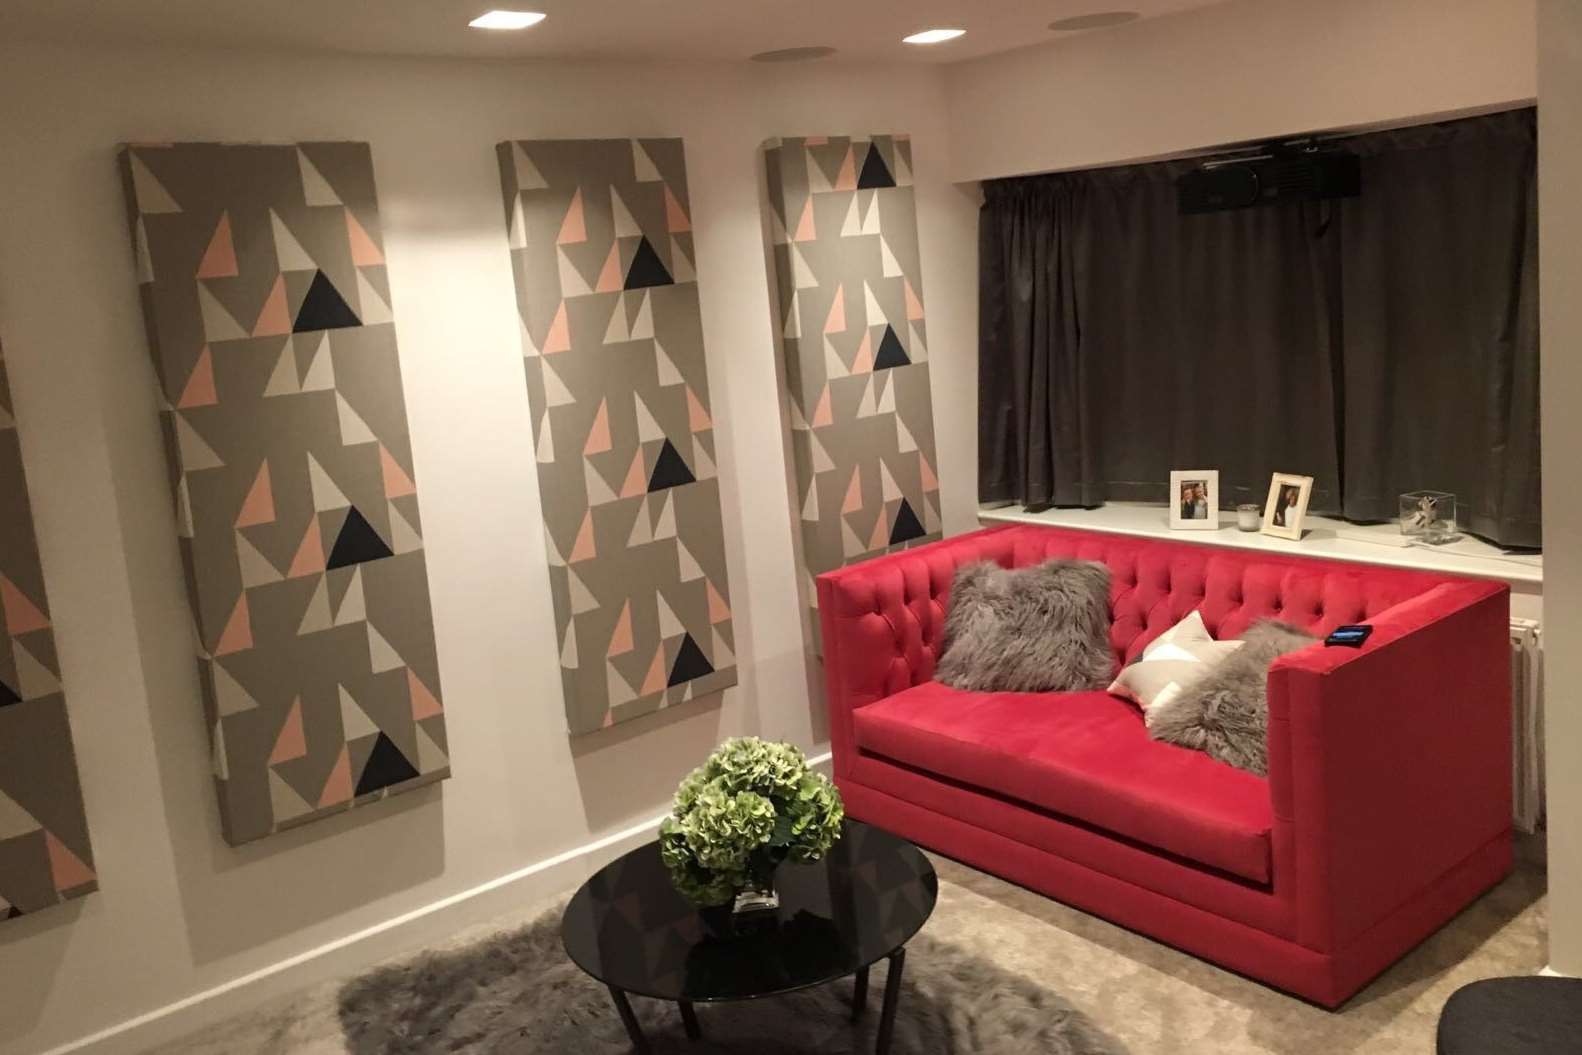 The couple's living room received a 60 Minute Makeover. Picture courtesy of Rossi Franco